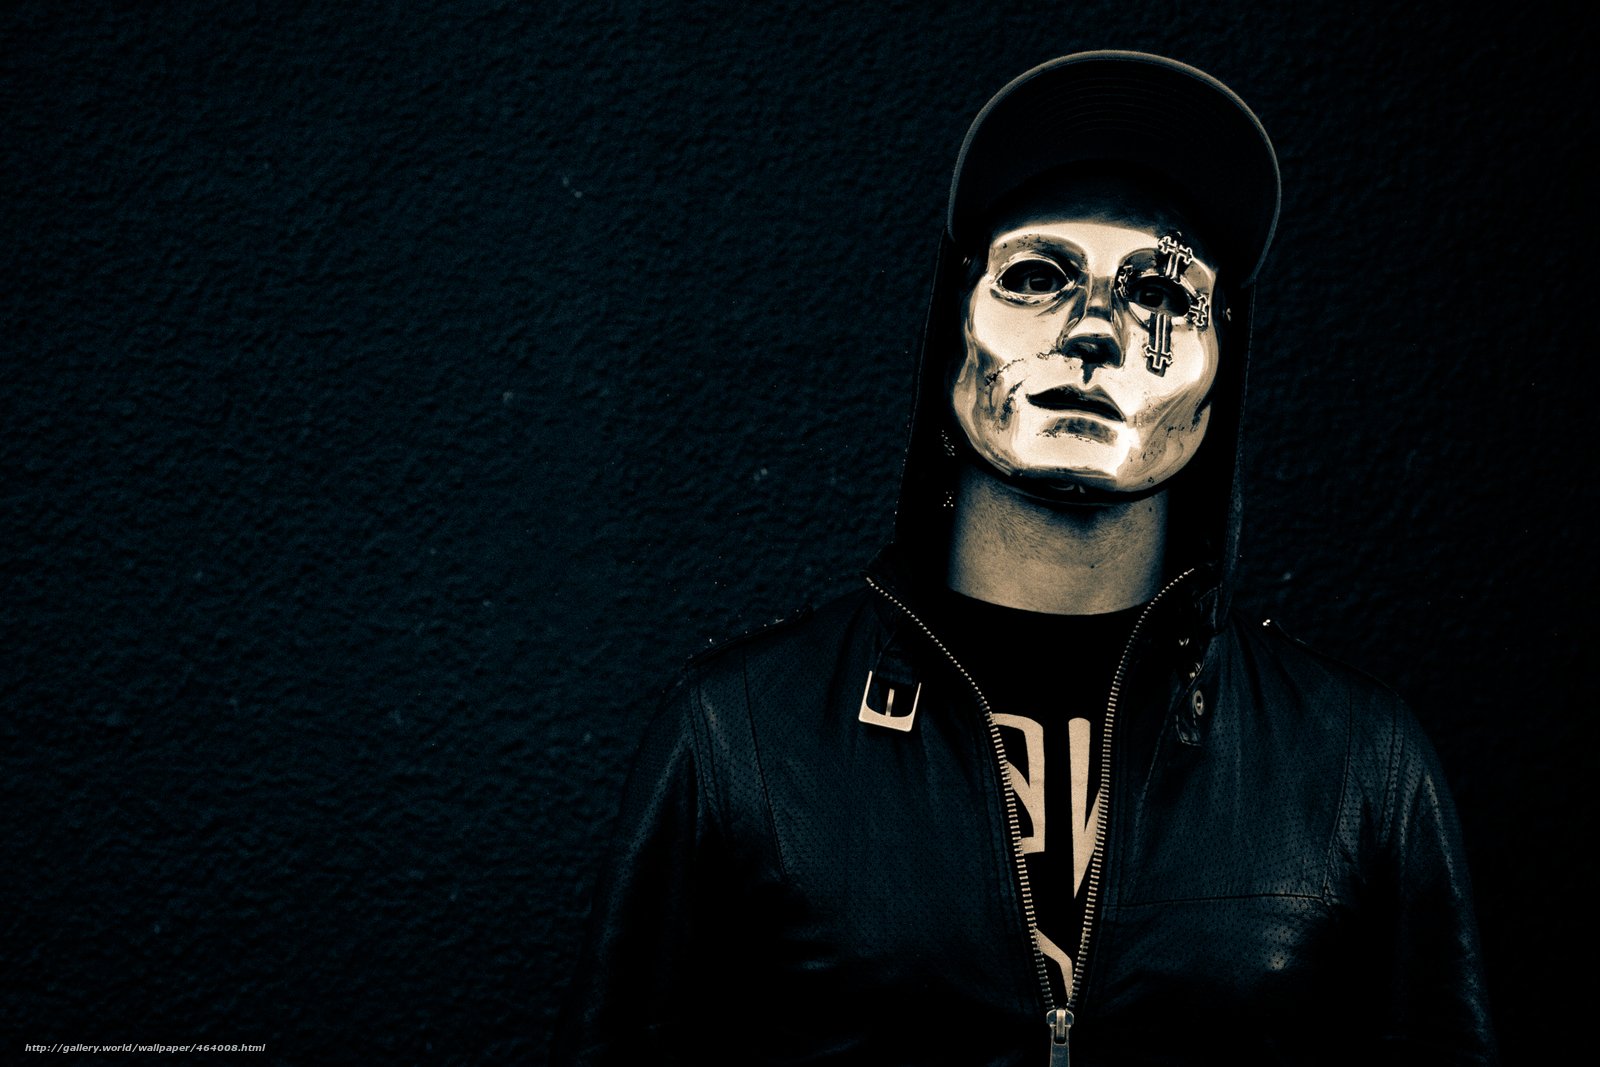 Download wallpaper hollywood undead danny american tragedy mask